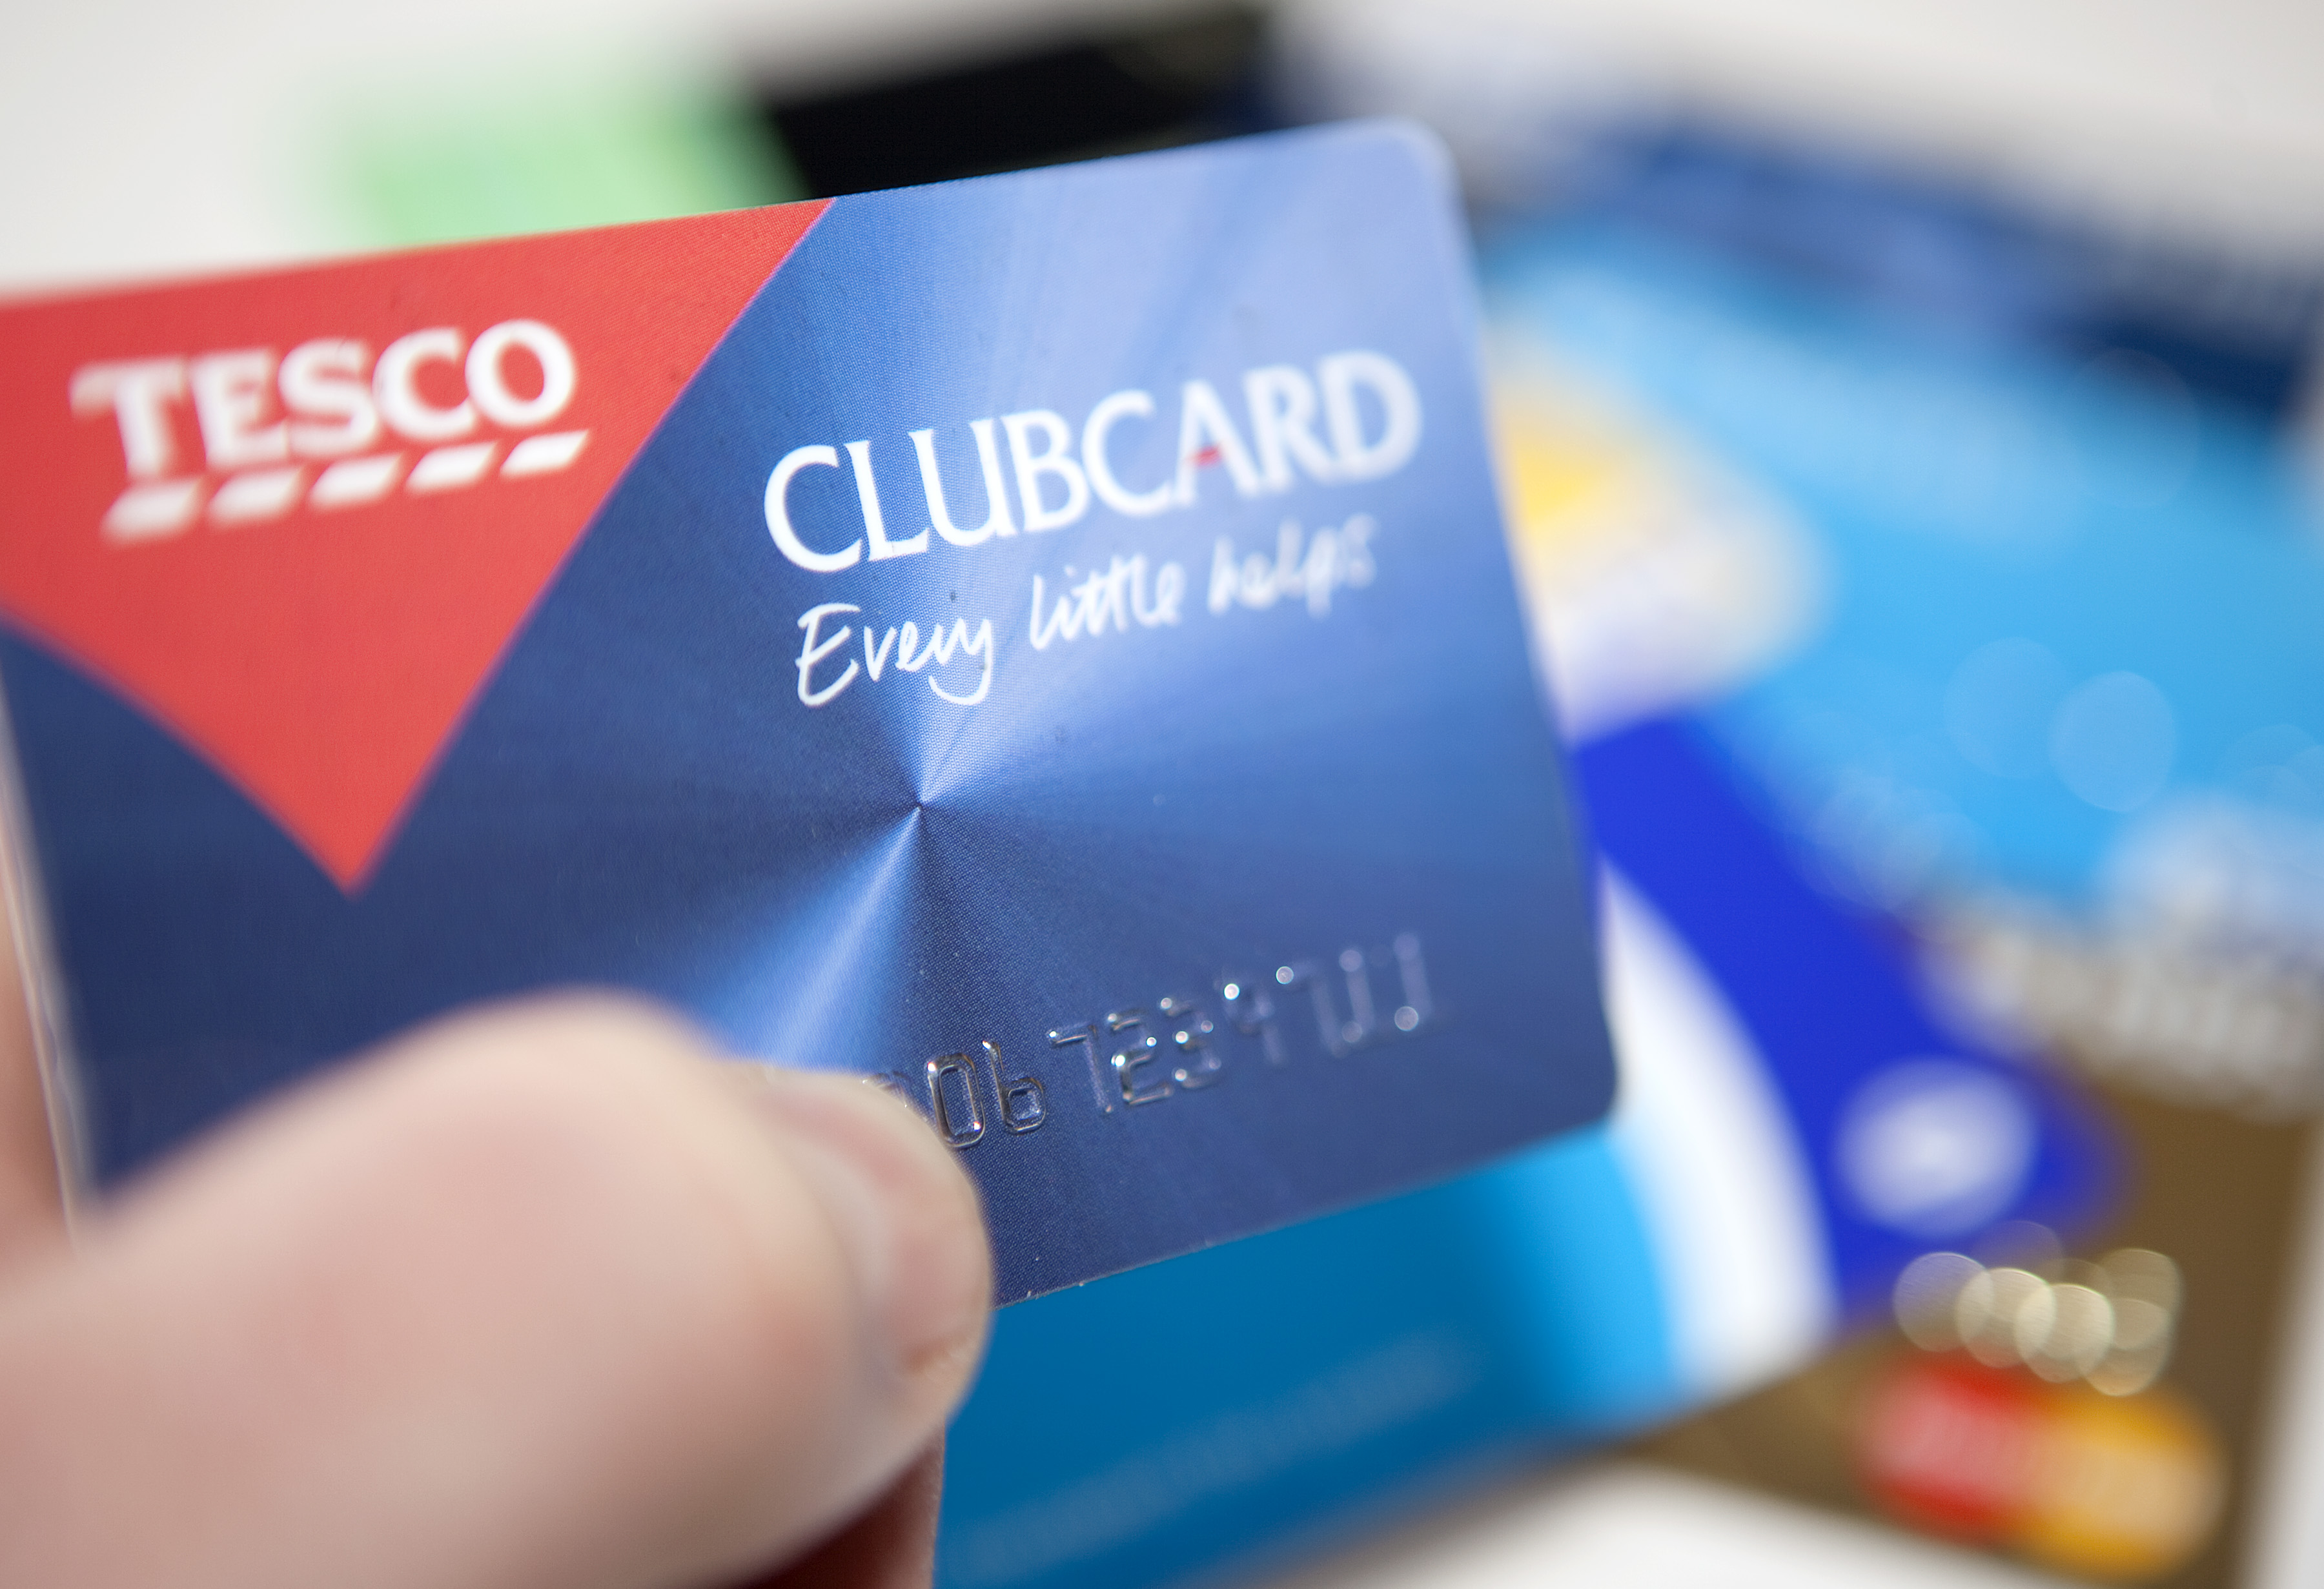 Tesco Clubcard users can receive special offers on a range of products through the year